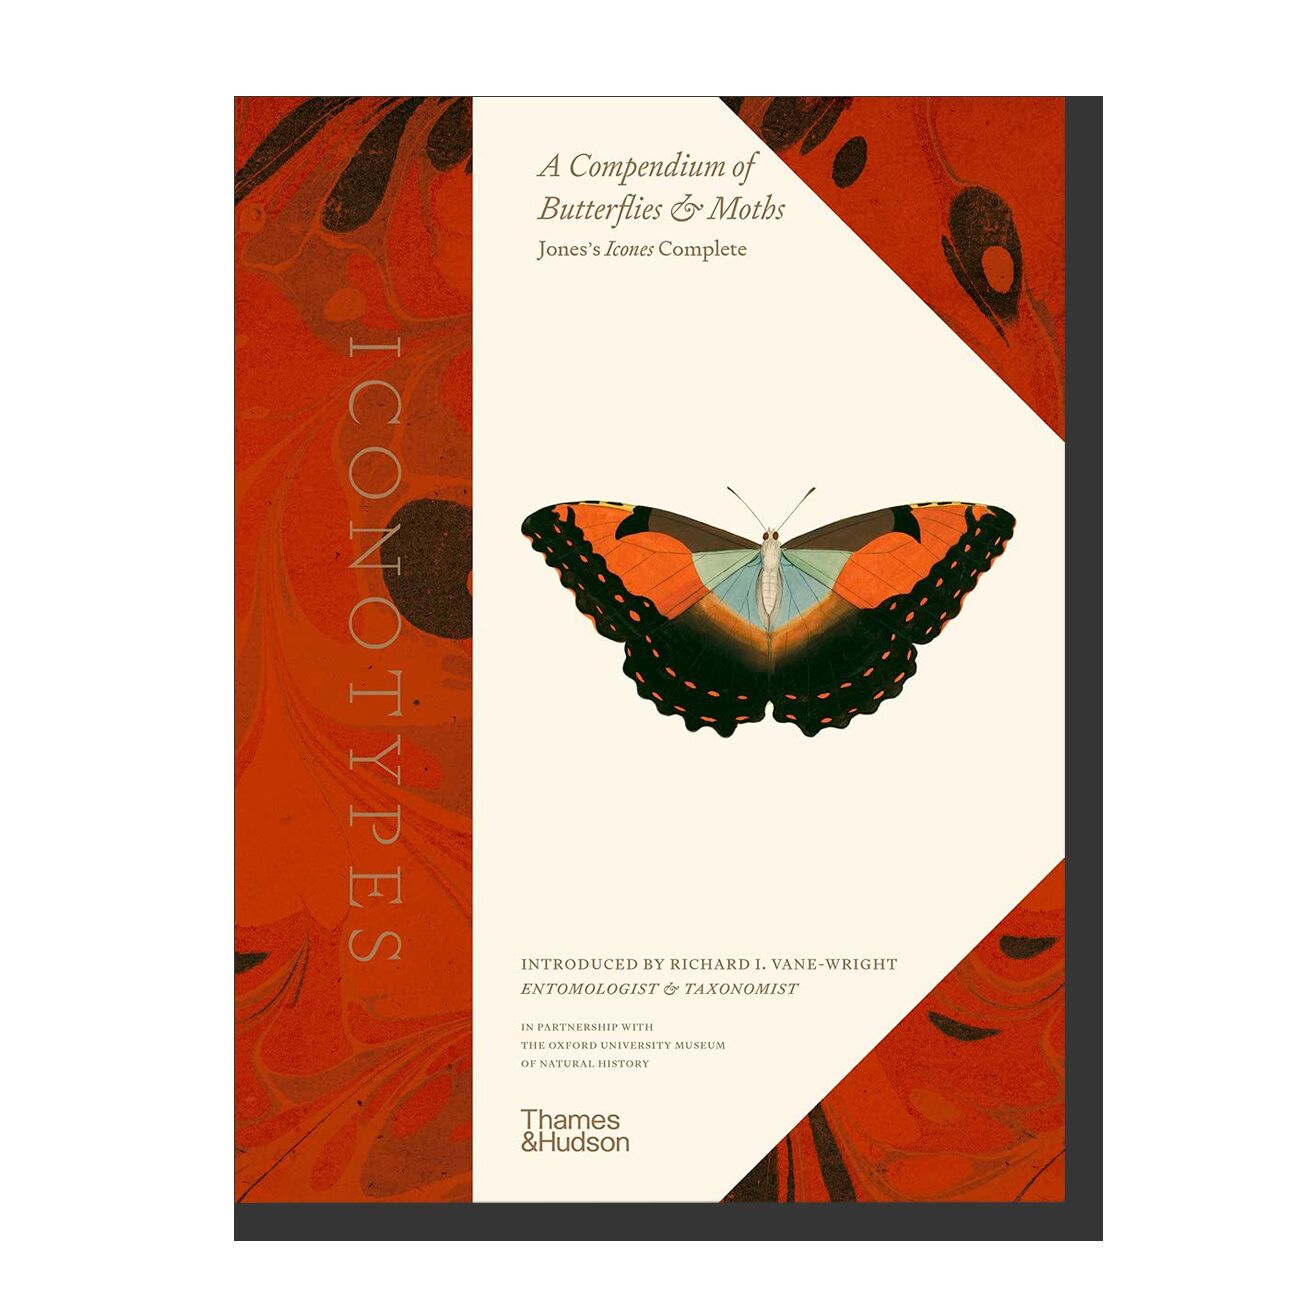 Iconotypes: A compendium of butterflies and moths